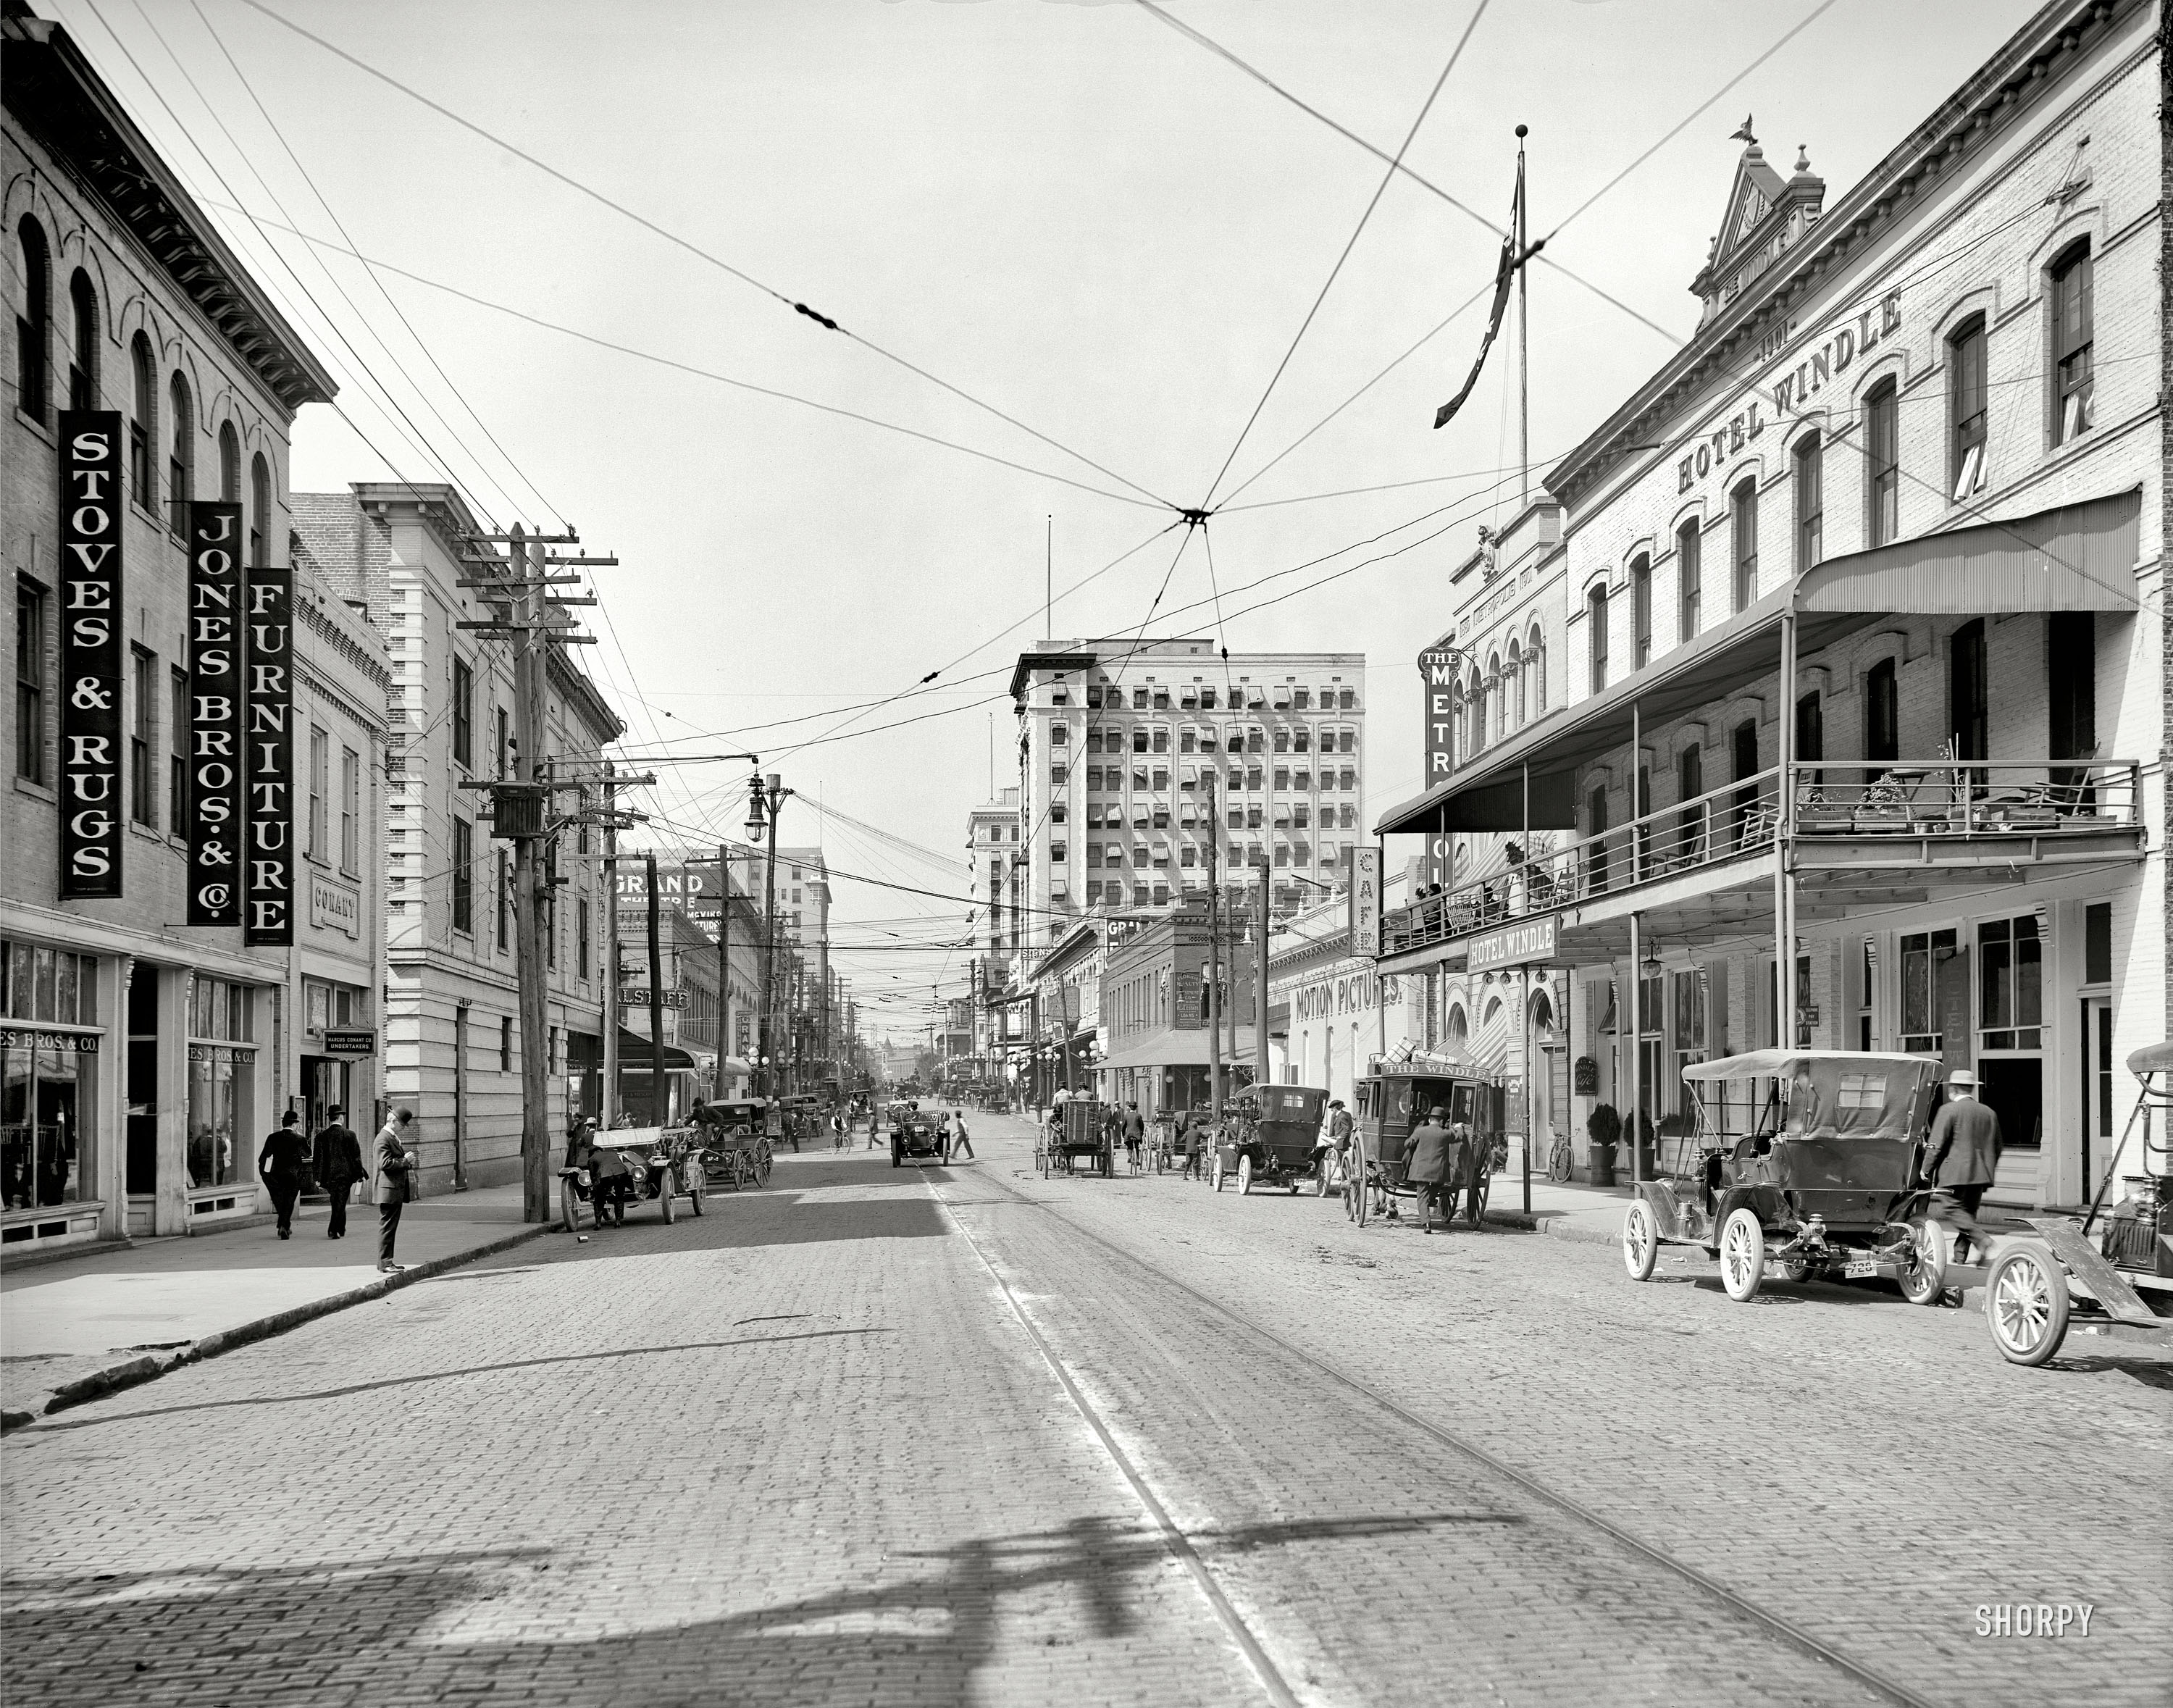 Jacksonville, Florida, circa 1910. "Forsyth Street west from City Hall." Note the city-issued car tags. 8x10 glass negative, Detroit Publishing Co. View full size.